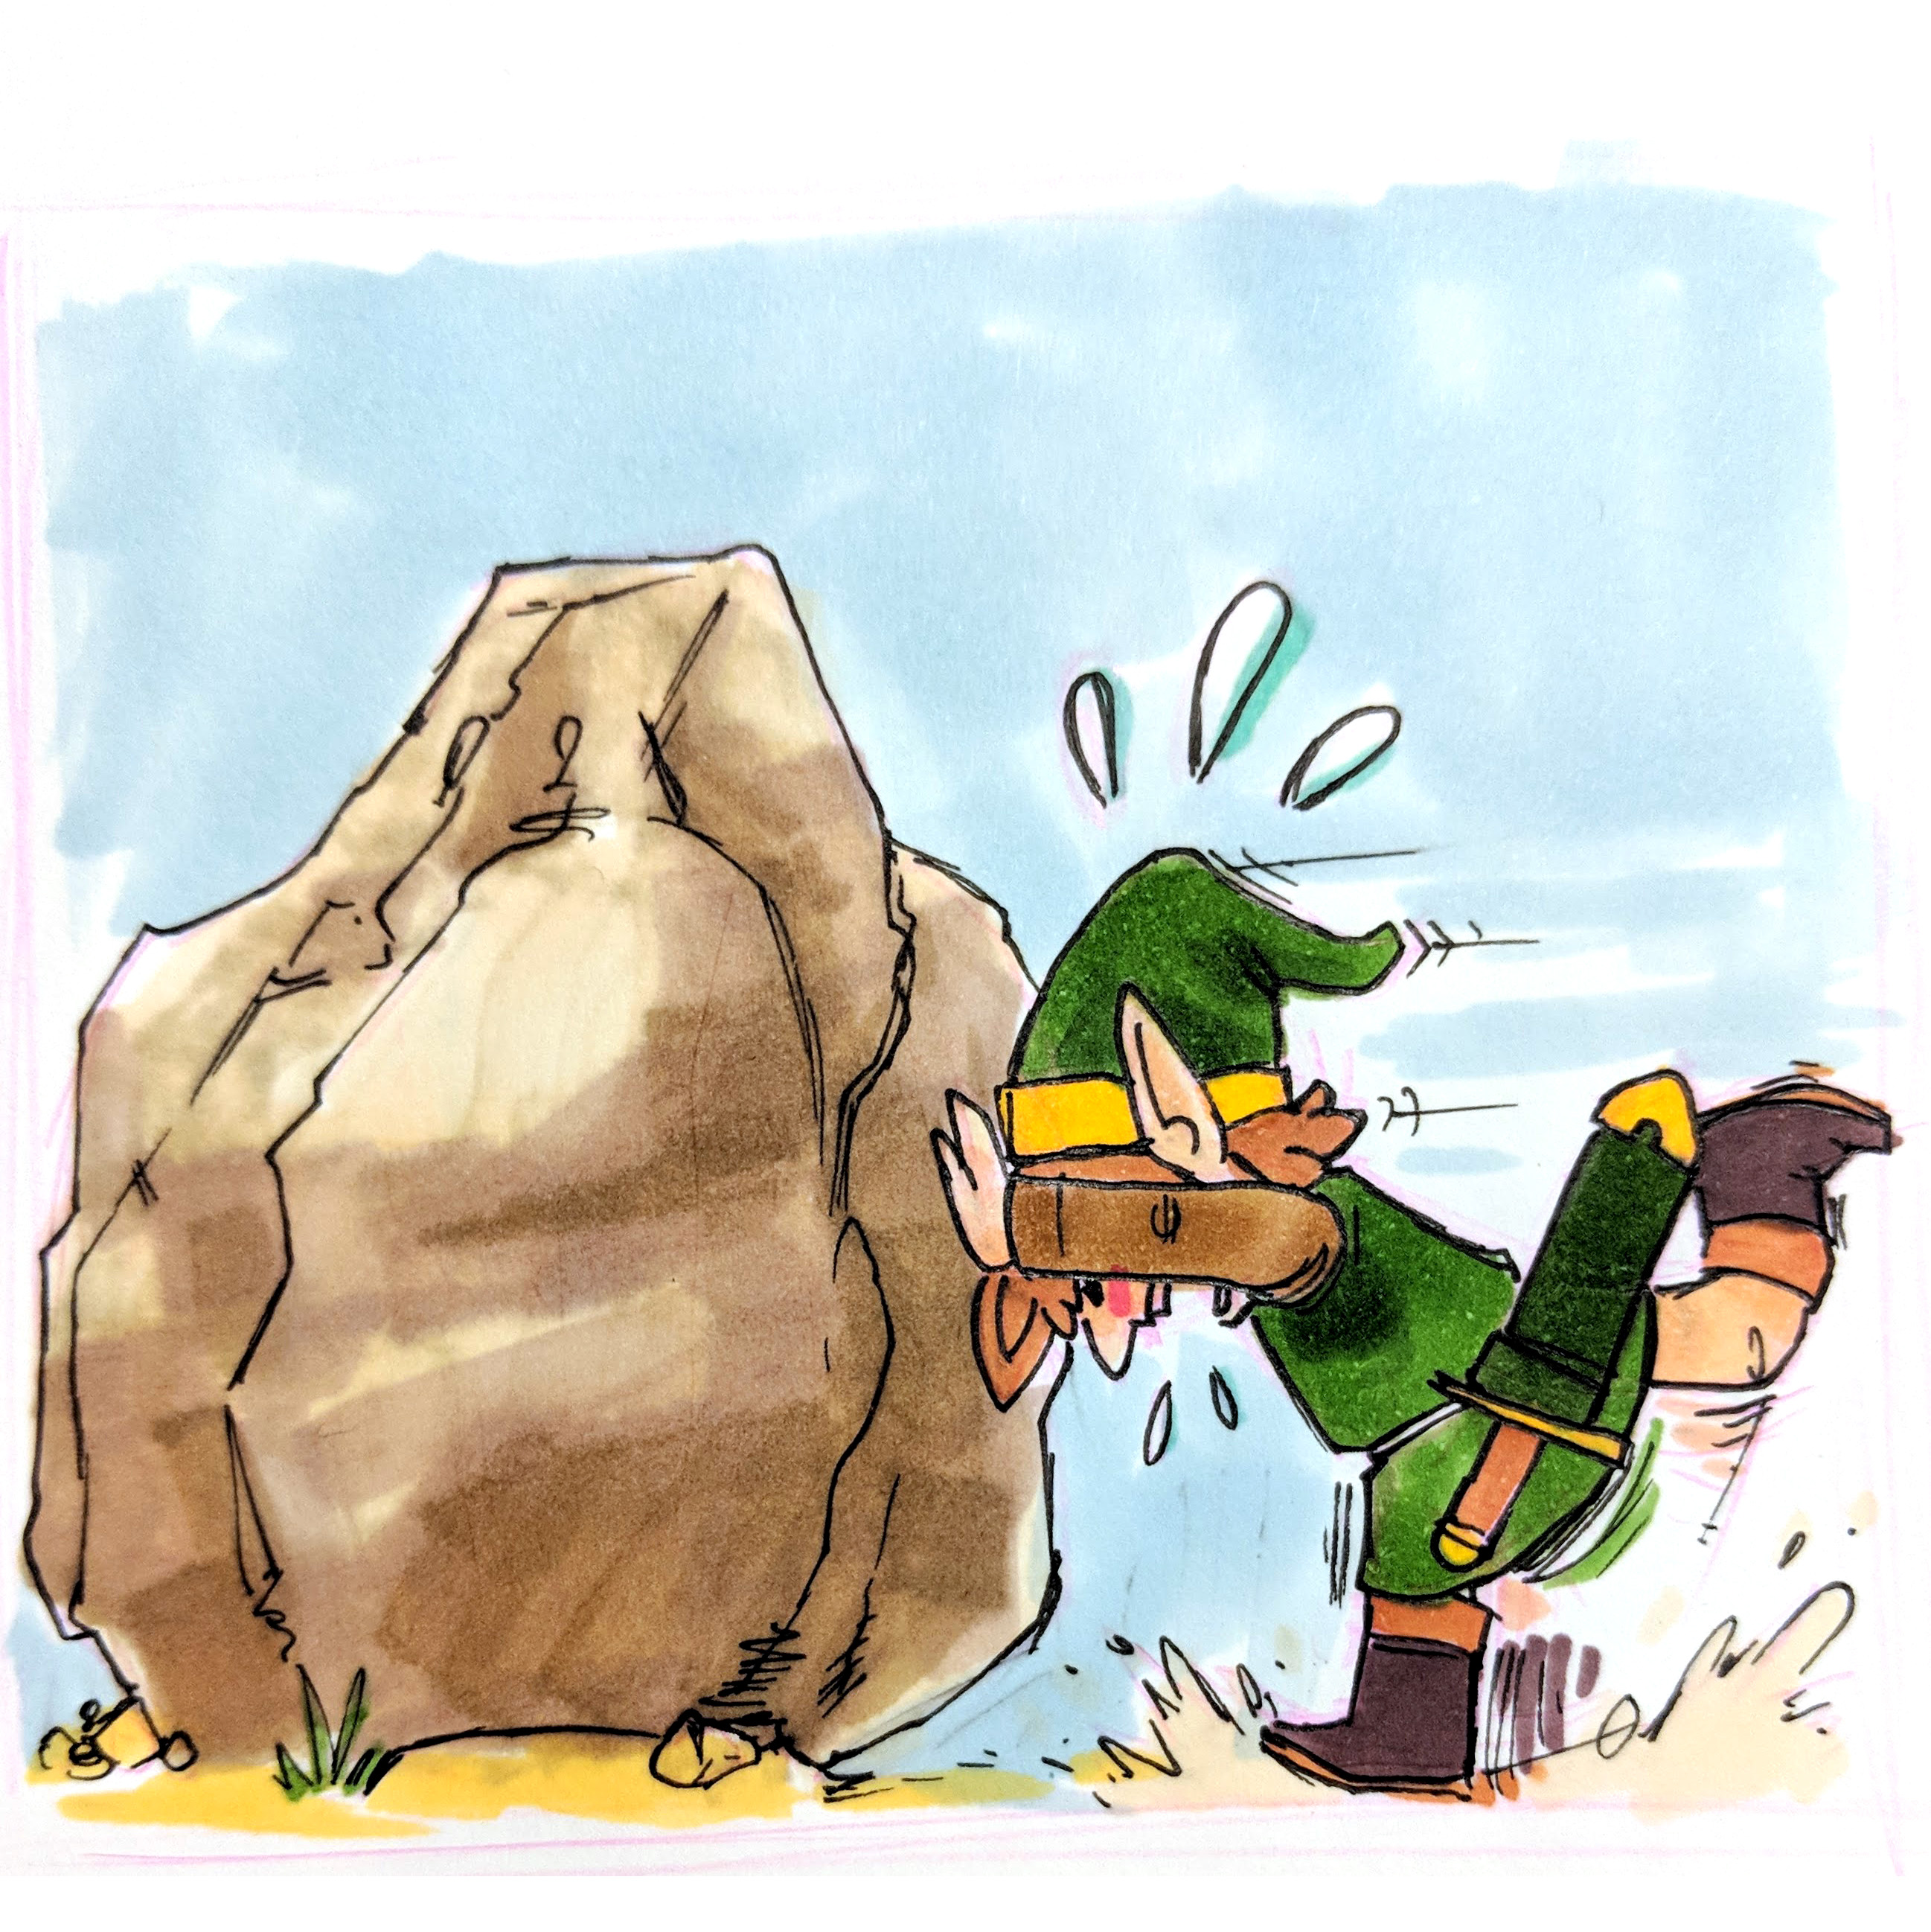 Link struggling to push a rock